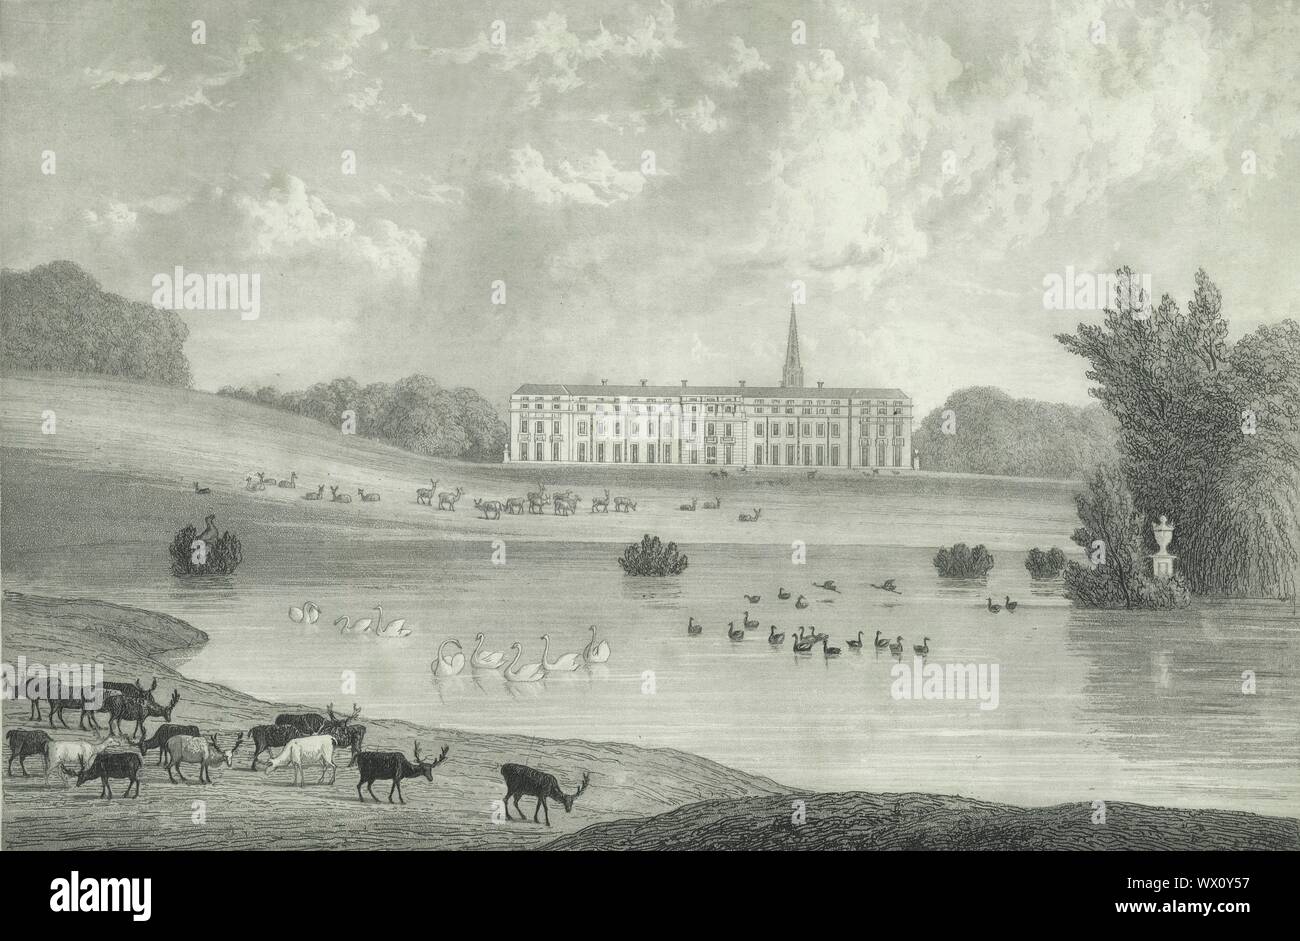 'Petworth Park', 1835. Grade I listed country house, rebuilt in 1688 by Charles Seymour and known for an art collection made by George Wyndham. Petworth Park, has the largest herd of fallow deer in England and was landscaped by Capability Brown. Steel engraving by William Westall after Thomas Henwood. From &quot;The History, Antiquities, and Topography of the County of Sussex, Volume the Second&quot;, by Thomas Walker Horsfield, F.S.A. [Baxter, Sussex Press, Lewes; Messrs. Nichols and Son, London, (1835)] Stock Photo